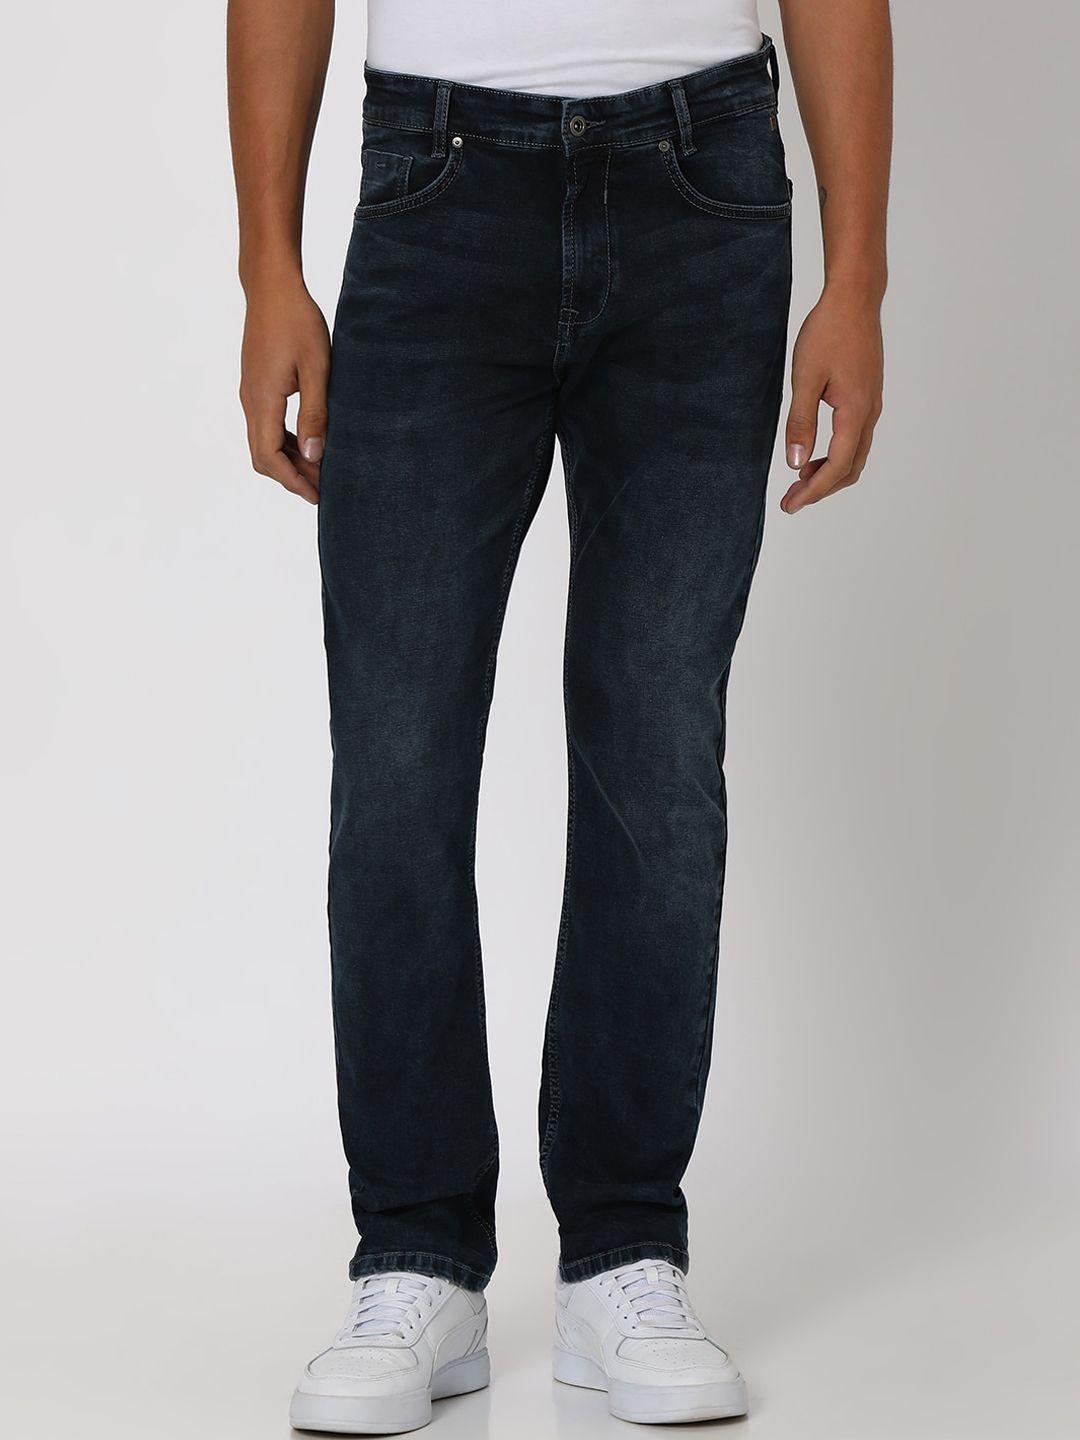 mufti-men-originals-mid-rise-clean-look-relaxed-straight-fit-stretchable-jeans